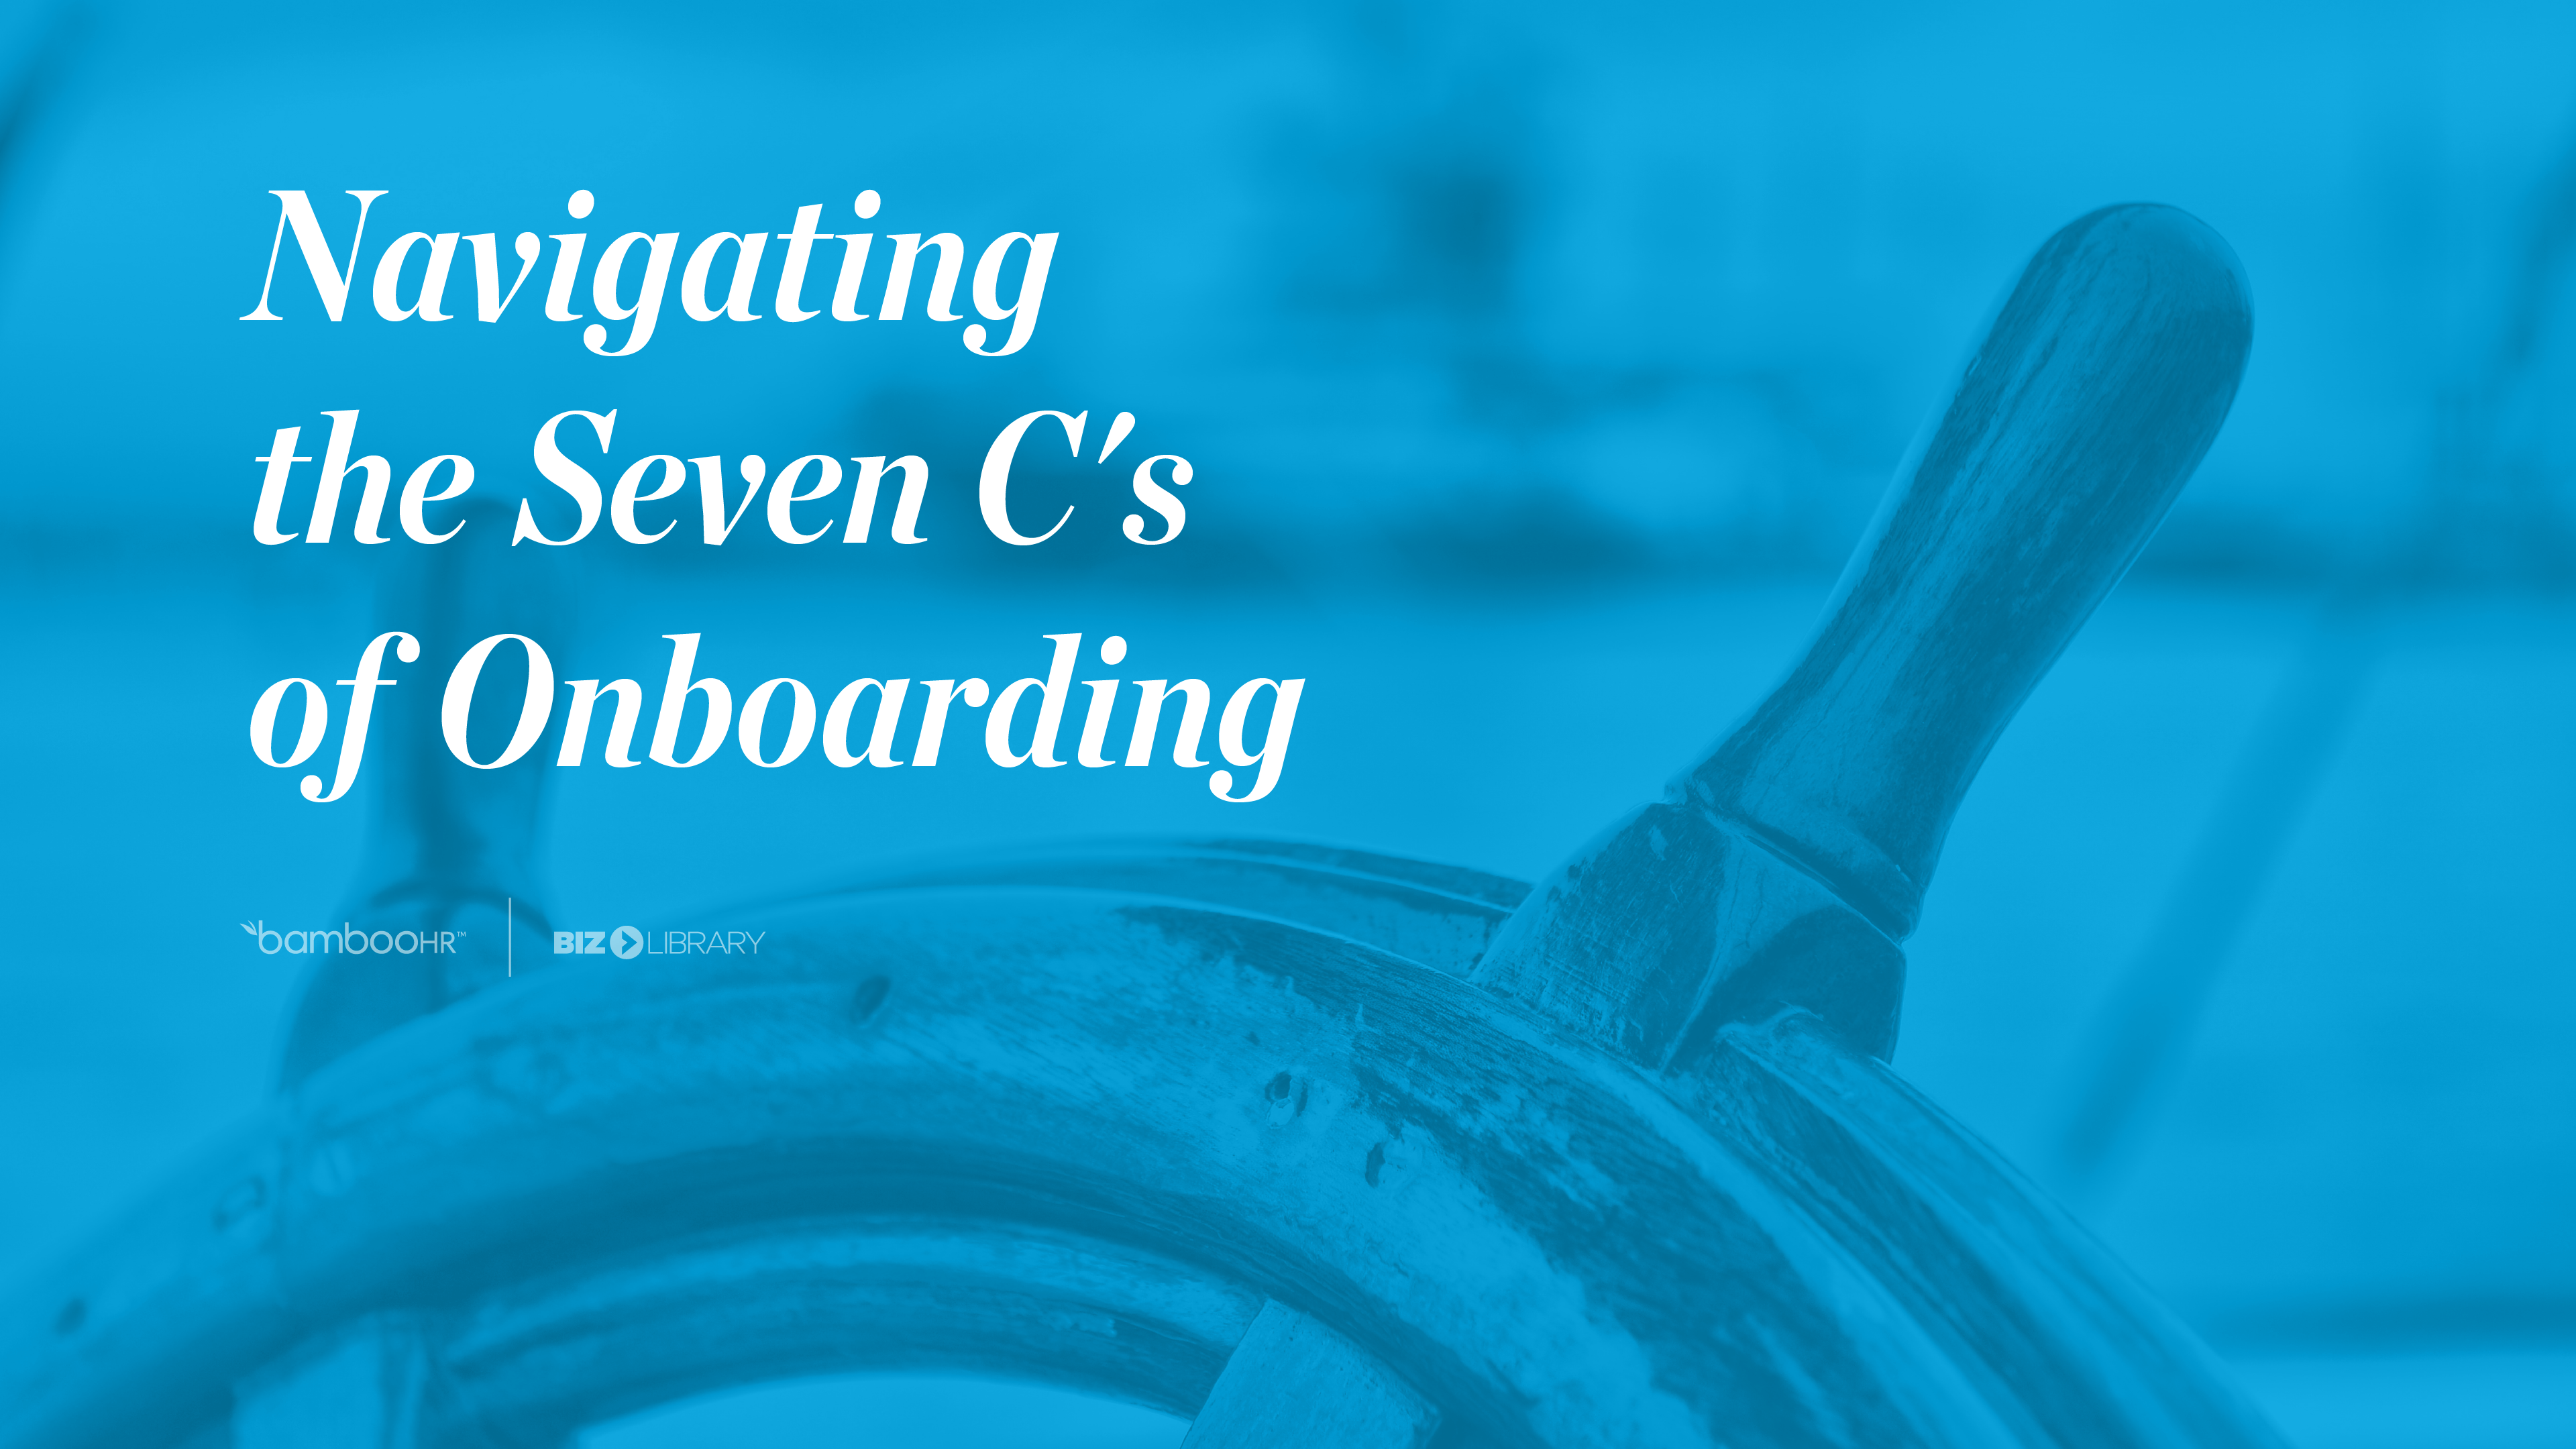 Navigating the Seven C’s of Onboarding